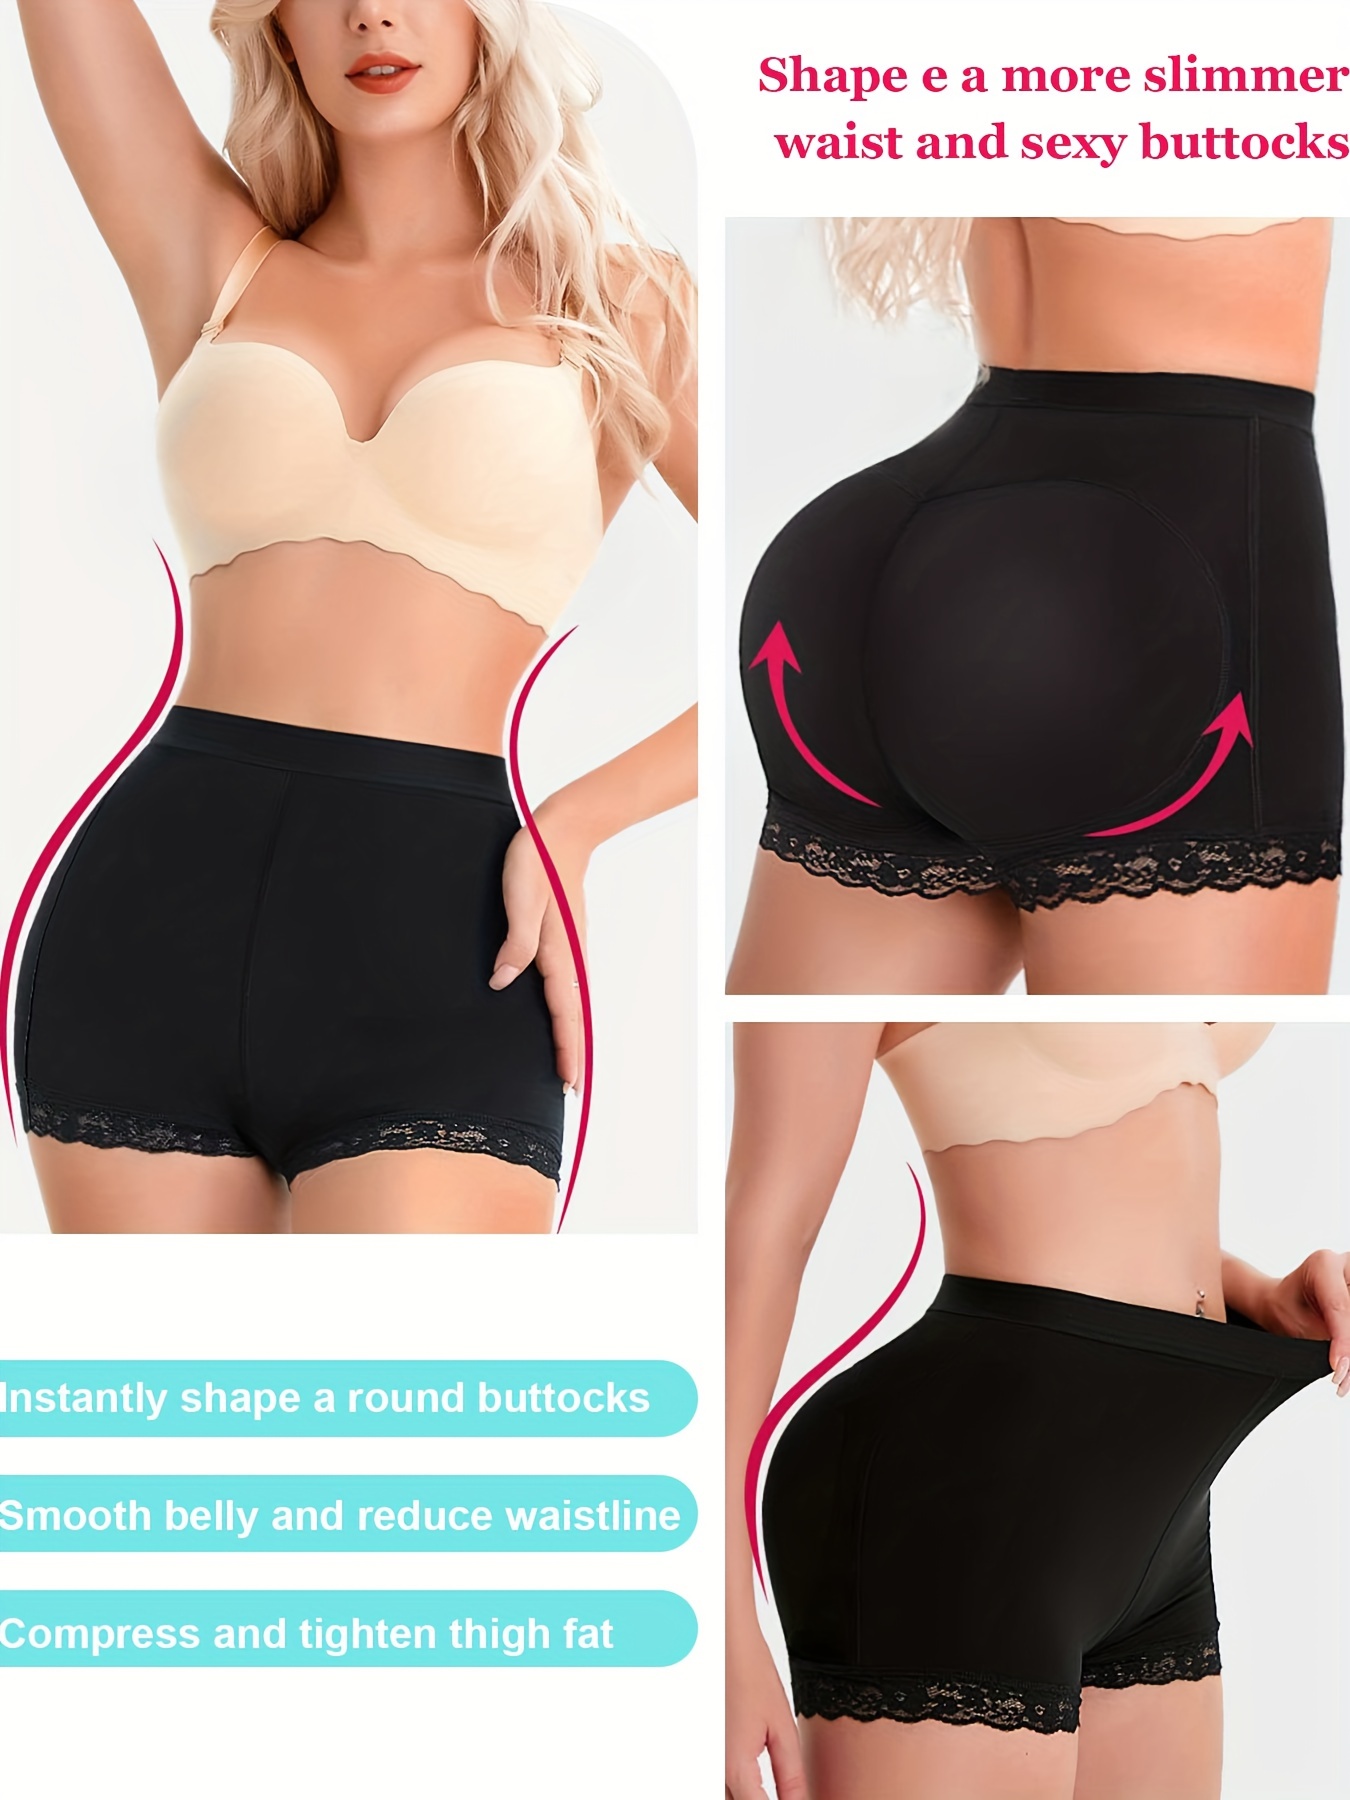 ASOS CURVE SHAPEWEAR New Improved Fit Control Lace Shorts